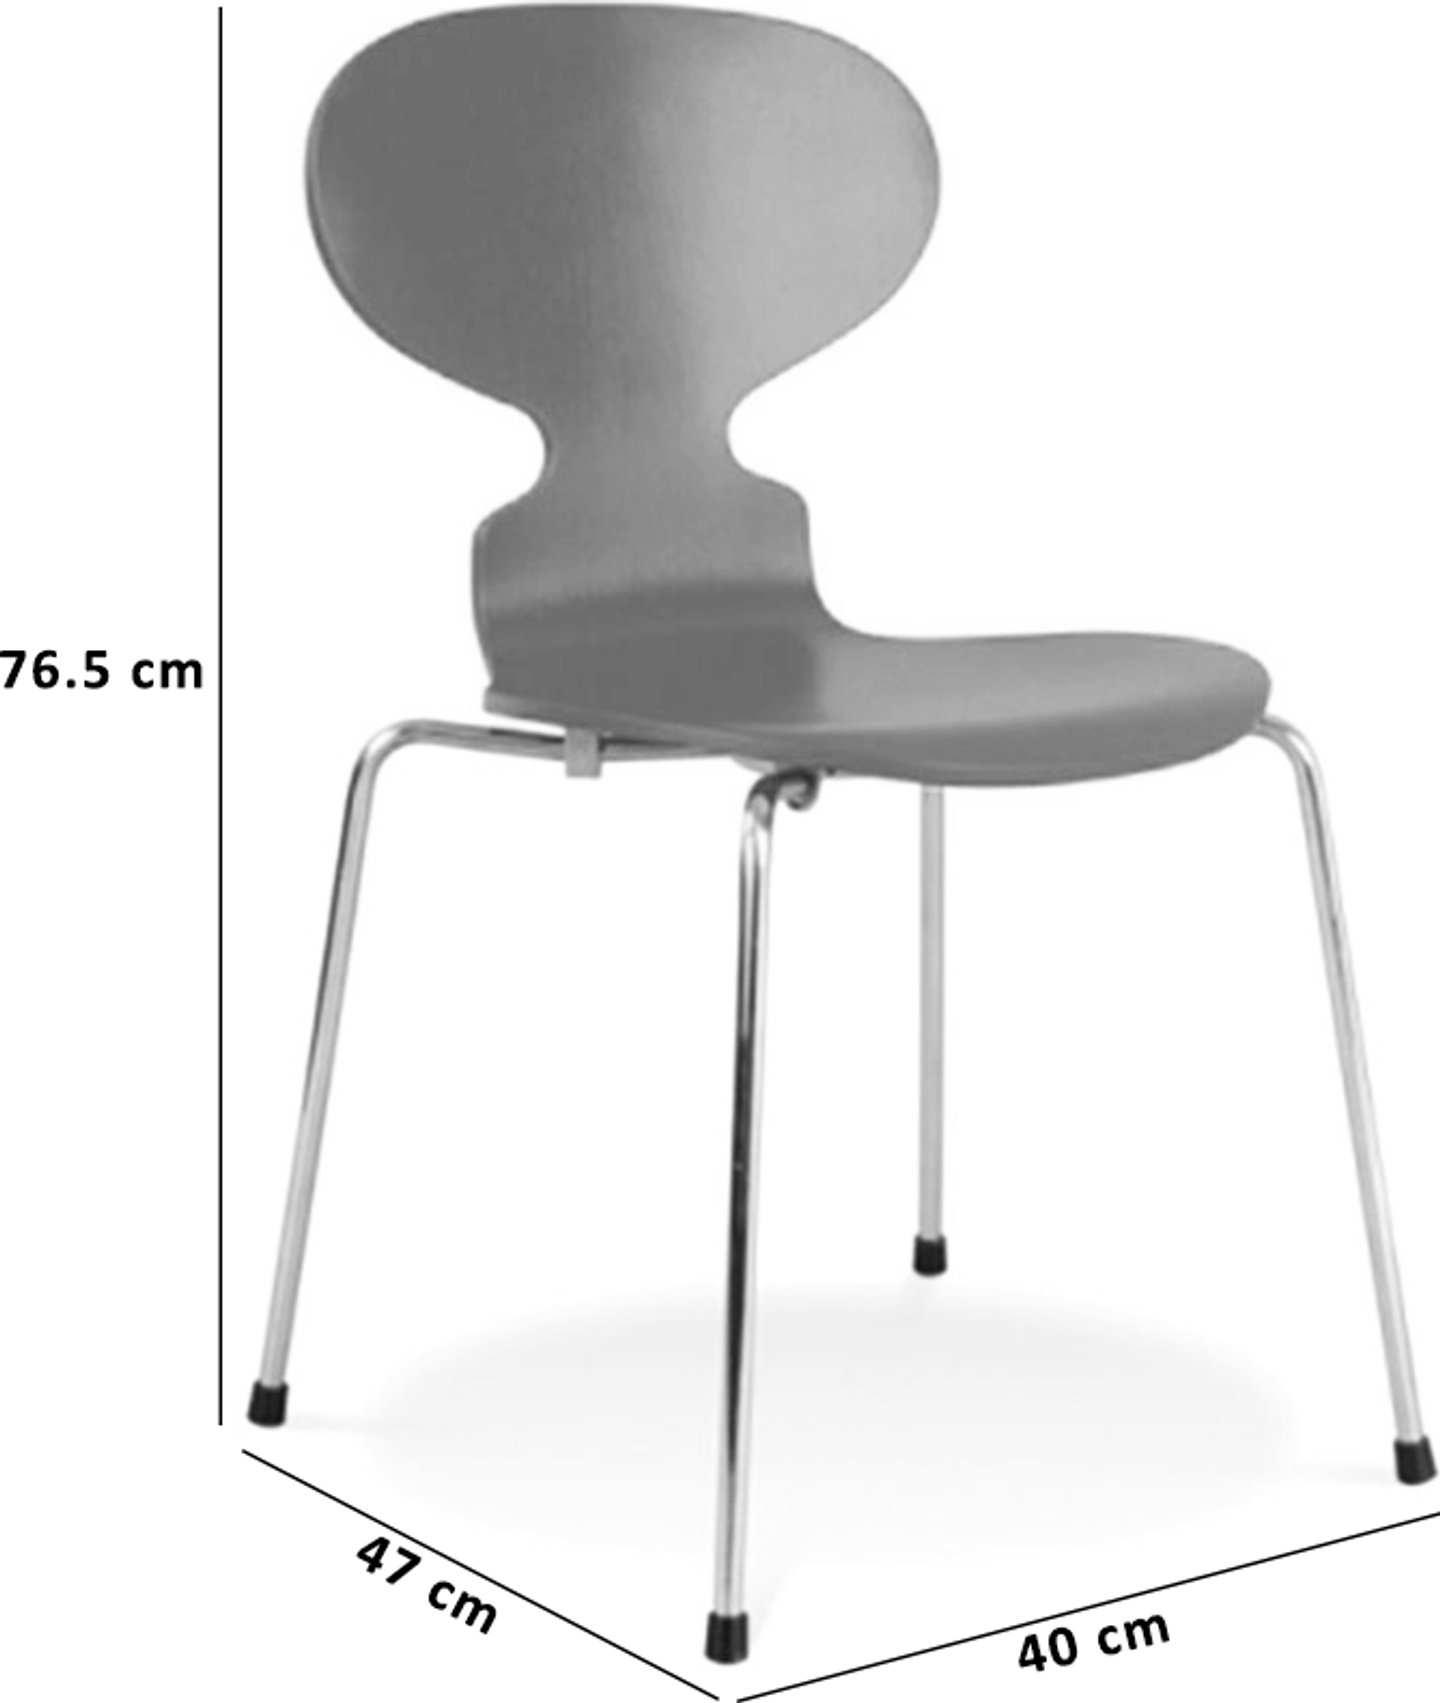 Ant chair White image.